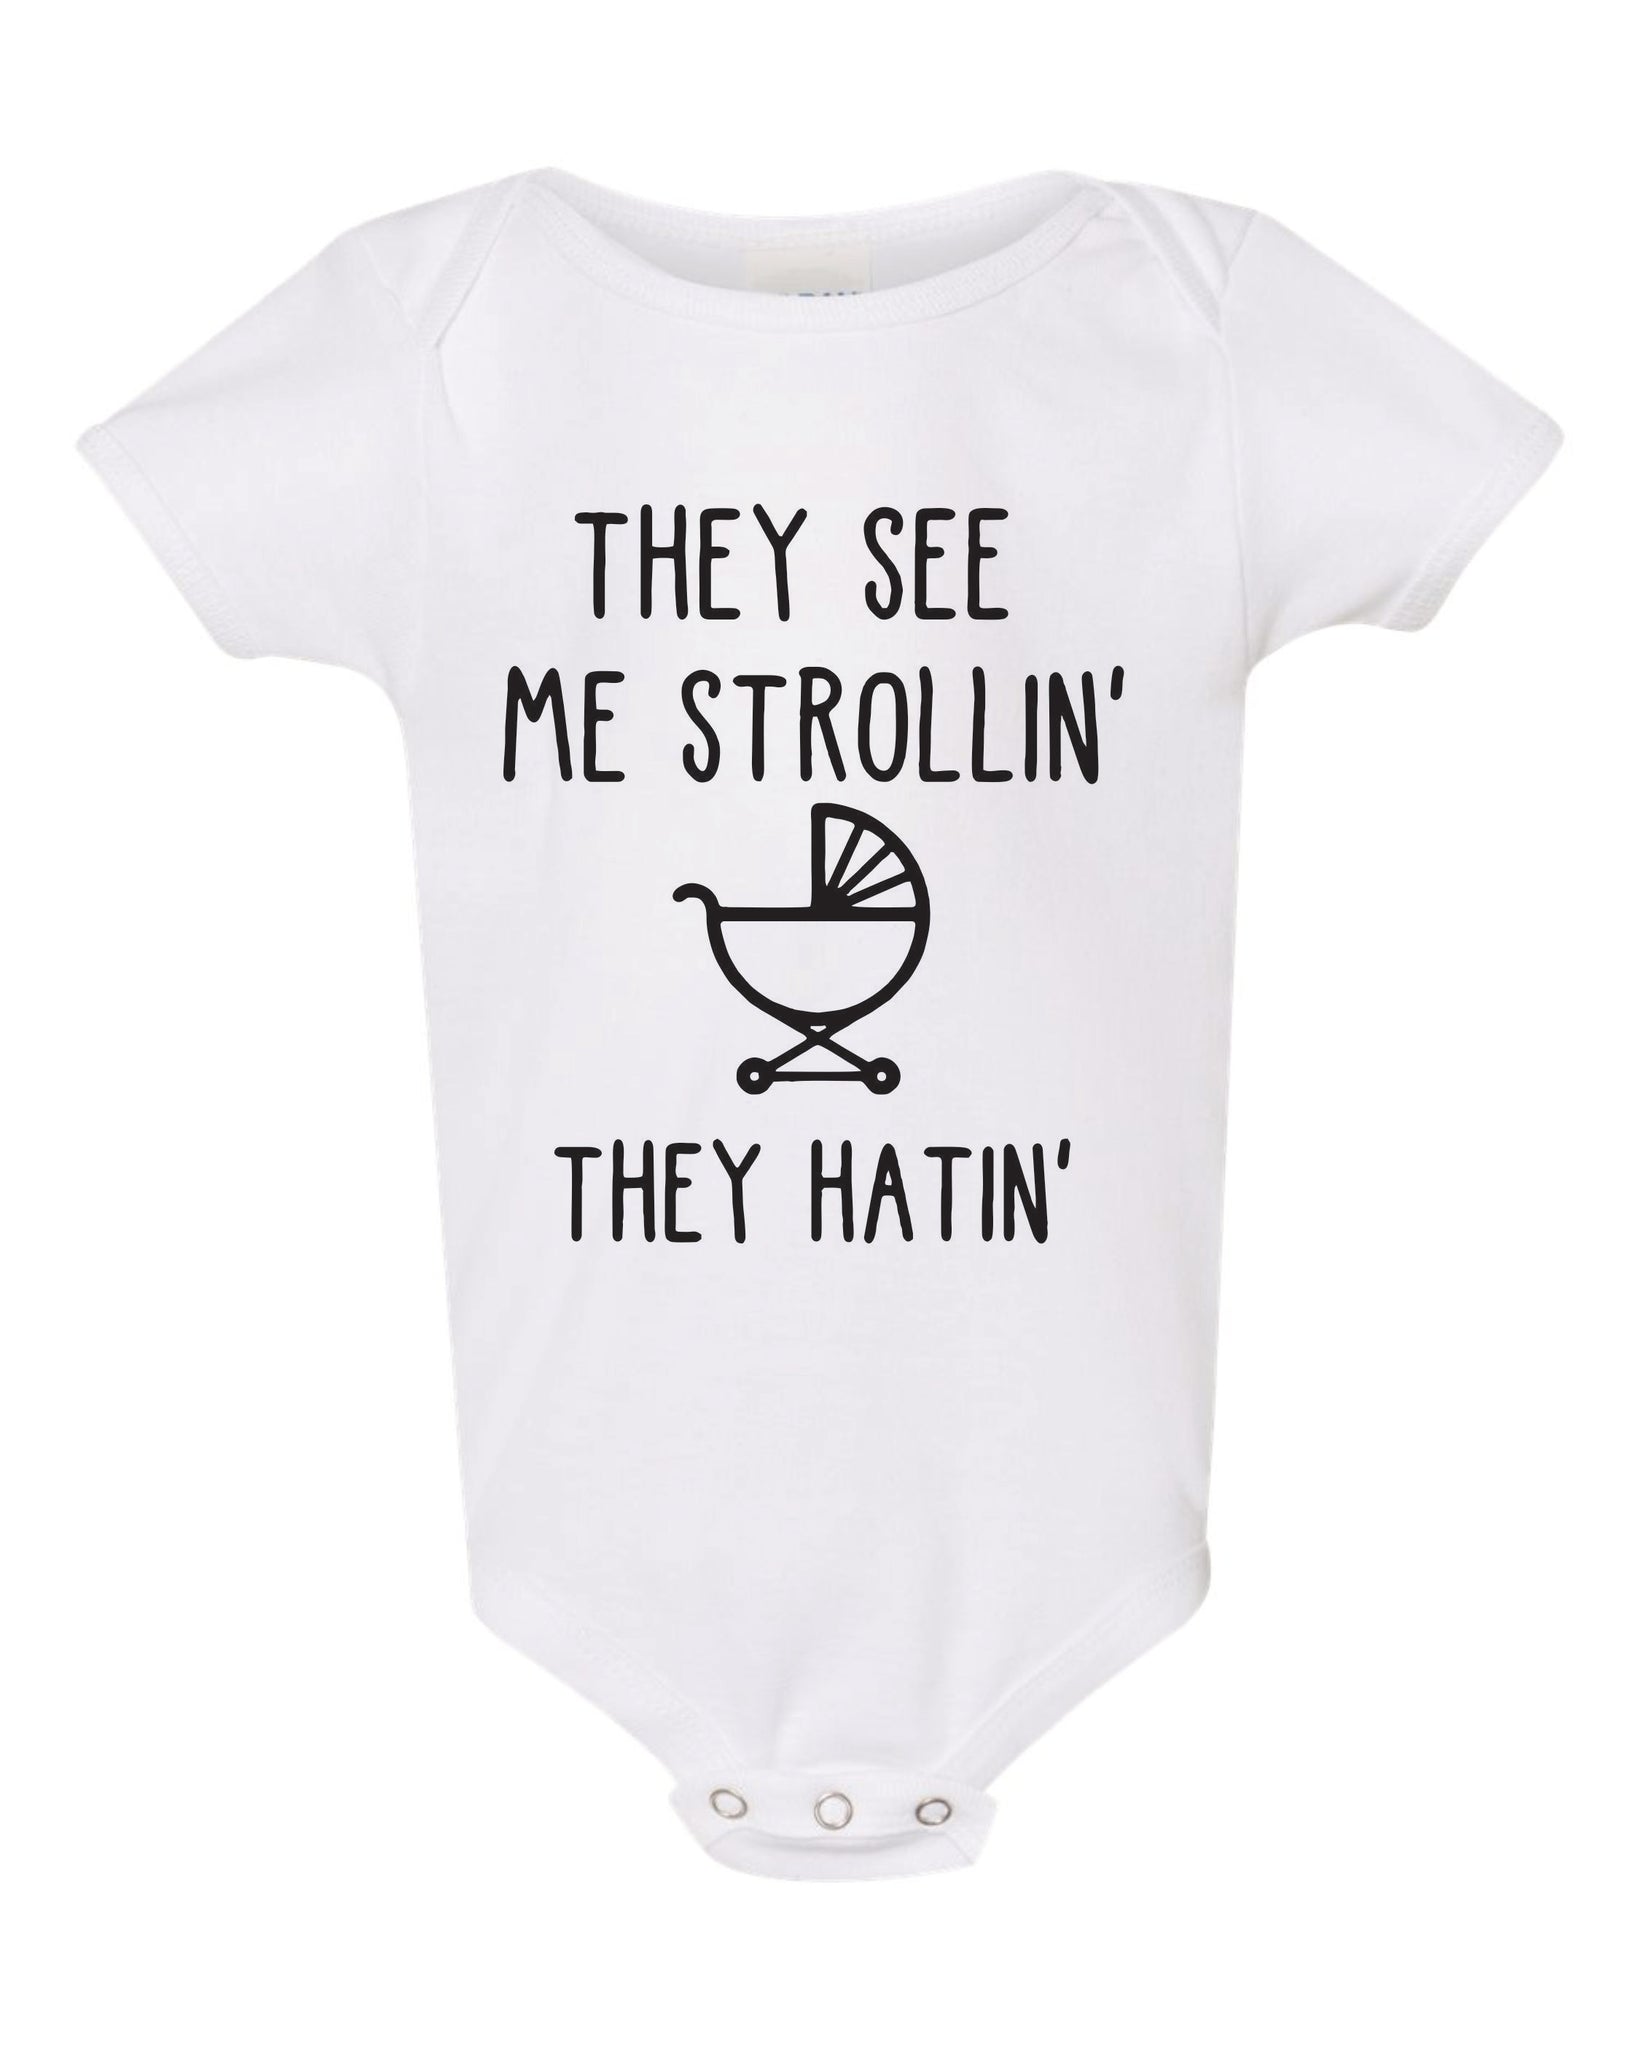 They See Me Strollin' They Hatin' Baby Shirt Funny Baby Bodysuit Baby Boy or Girl Cute Baby Shirt Riding Dirty